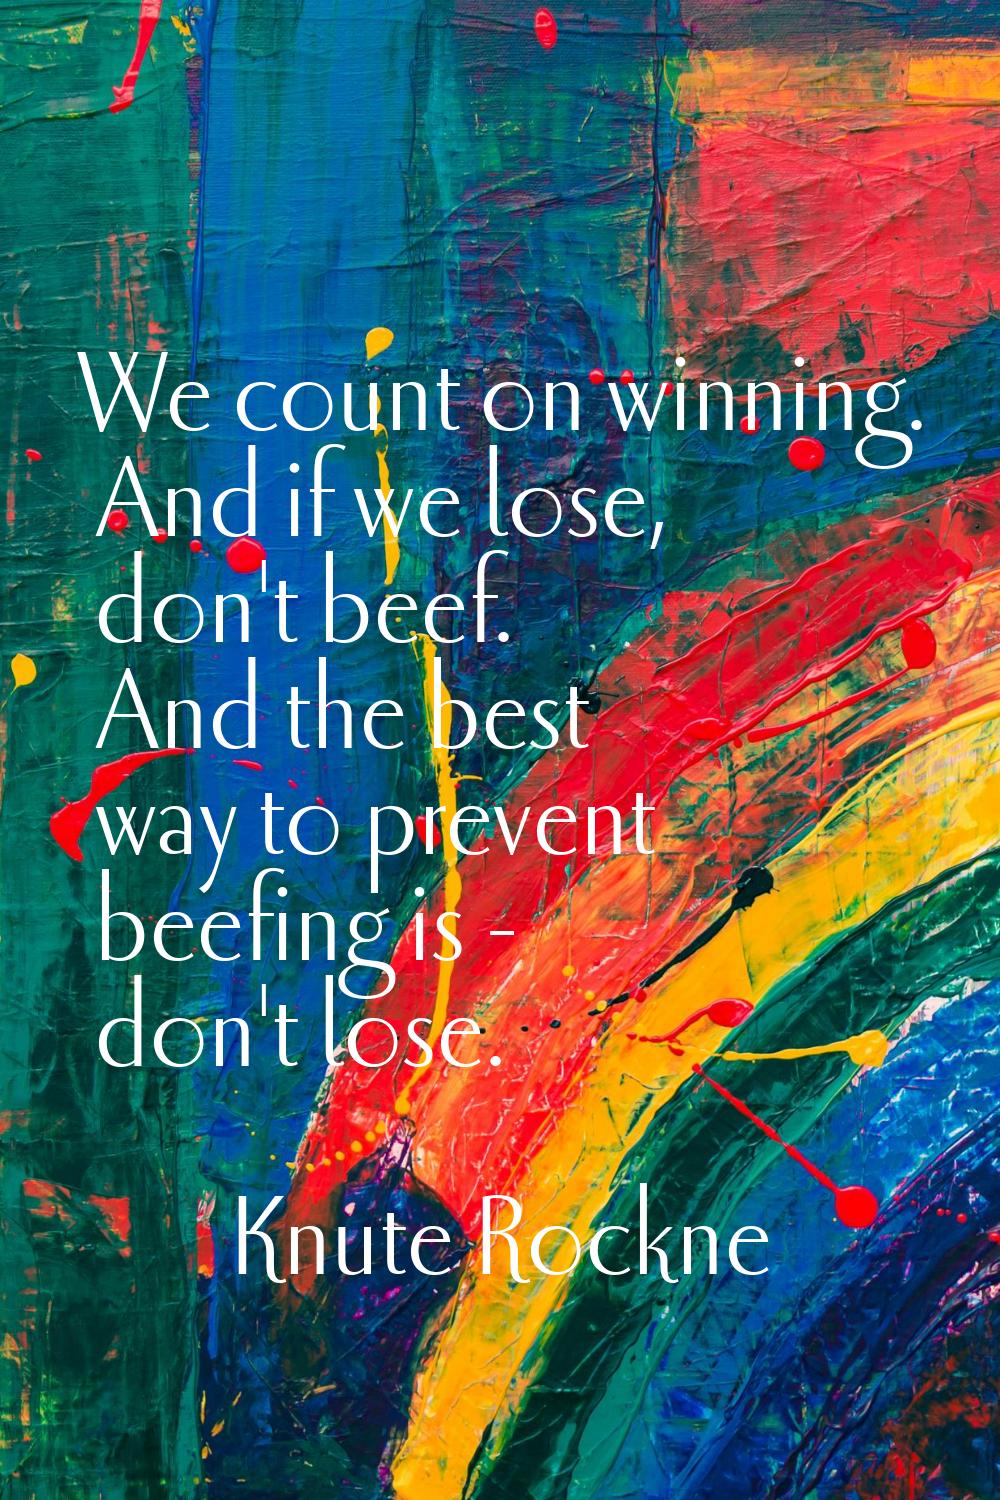 We count on winning. And if we lose, don't beef. And the best way to prevent beefing is - don't los